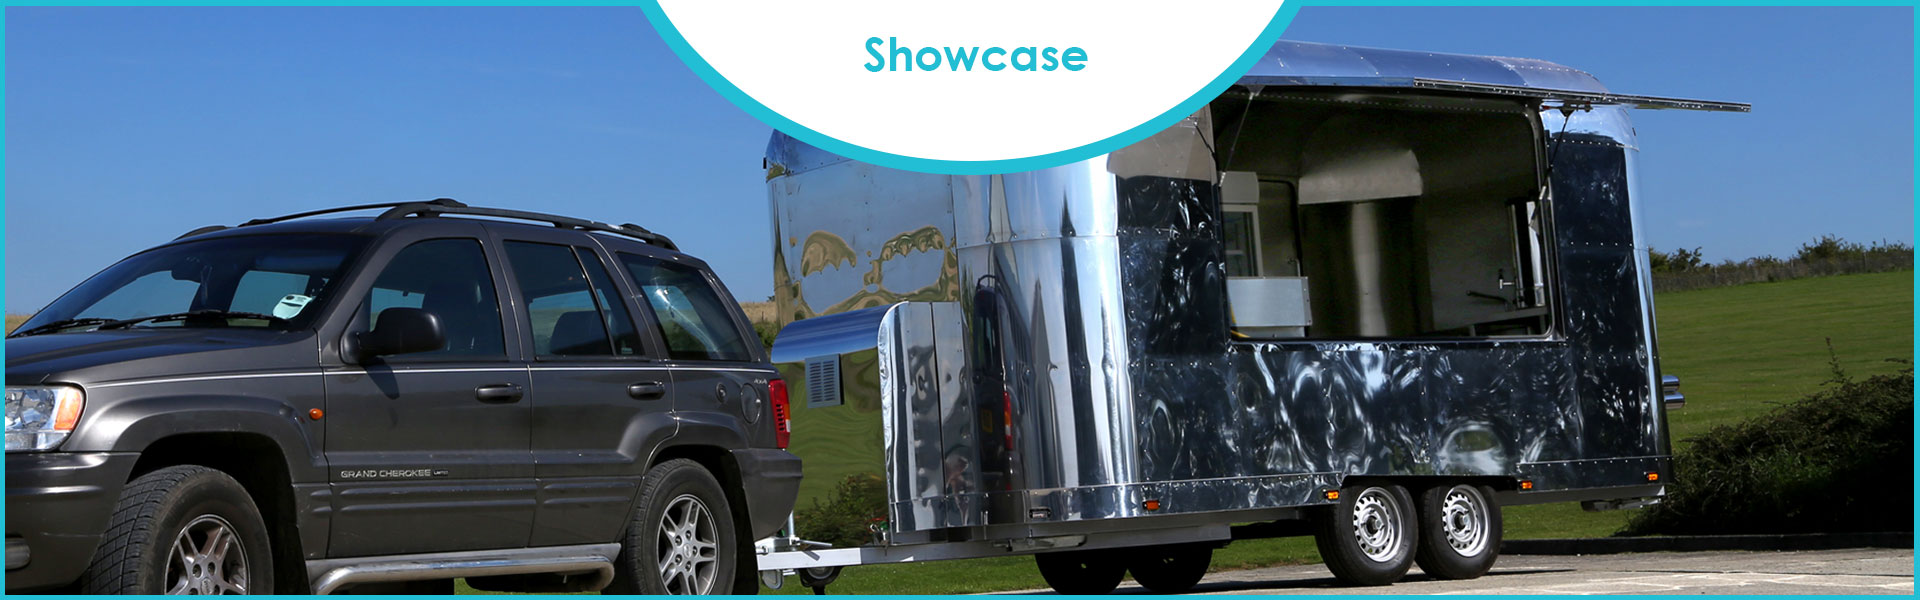 Catering-trailer-hire-showcase-header